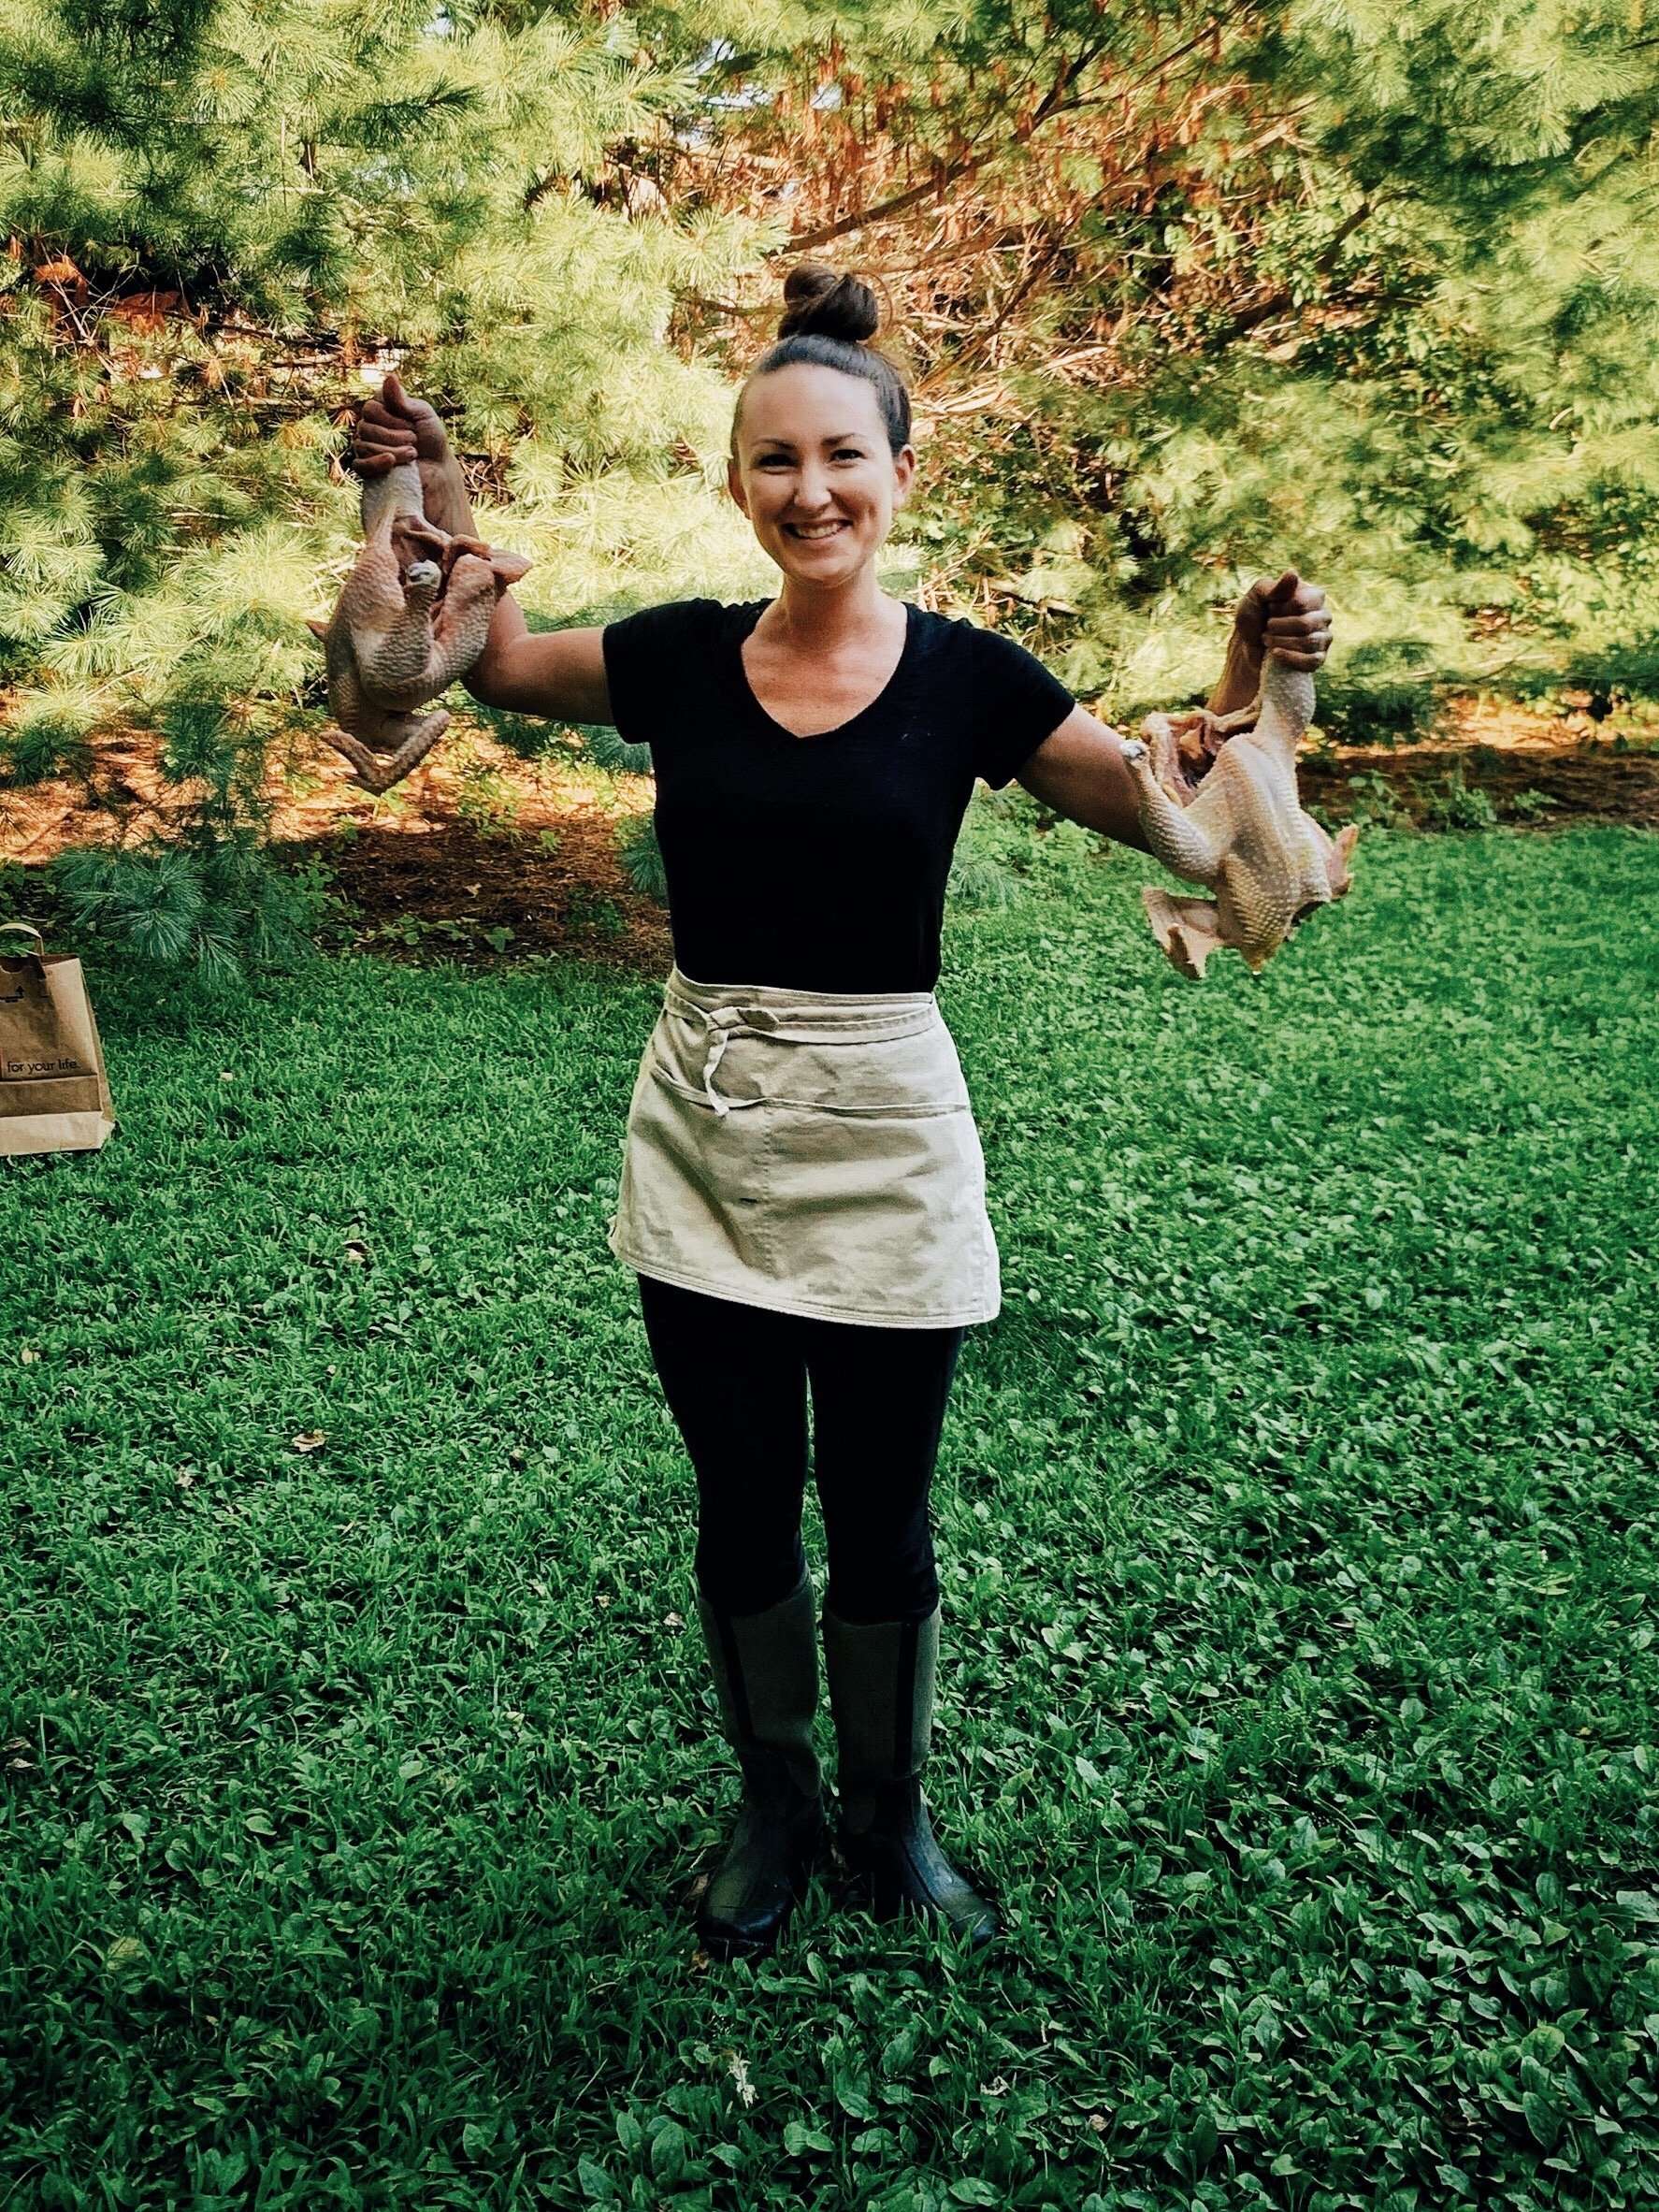 Katie holding butchered chickens